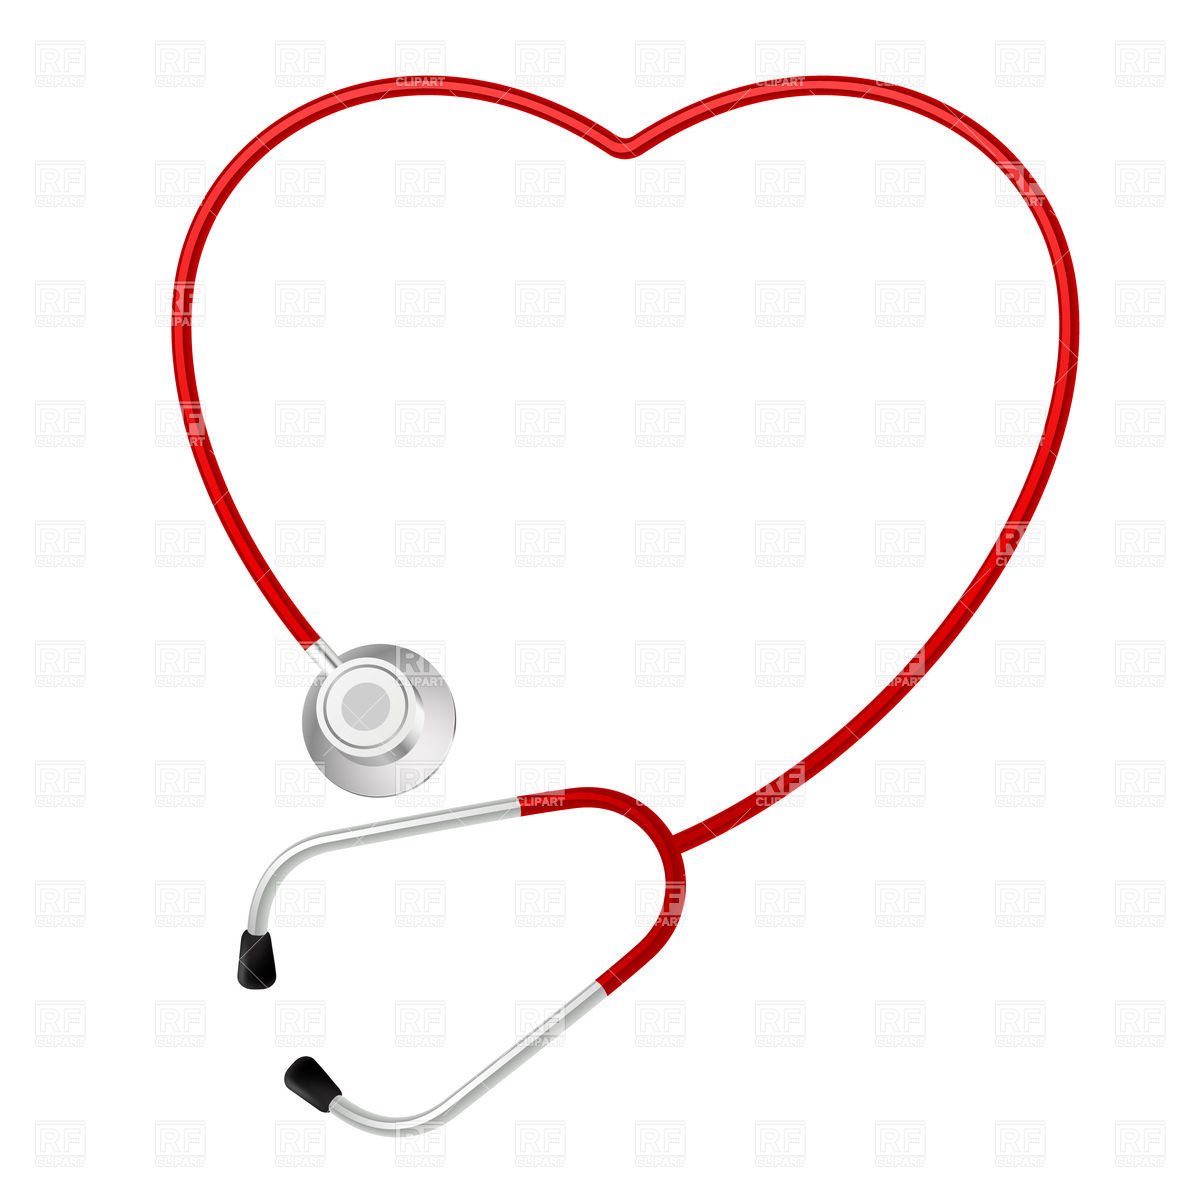 Shaped Stethoscope 8412 Download Royalty Free Vector Clipart  Eps